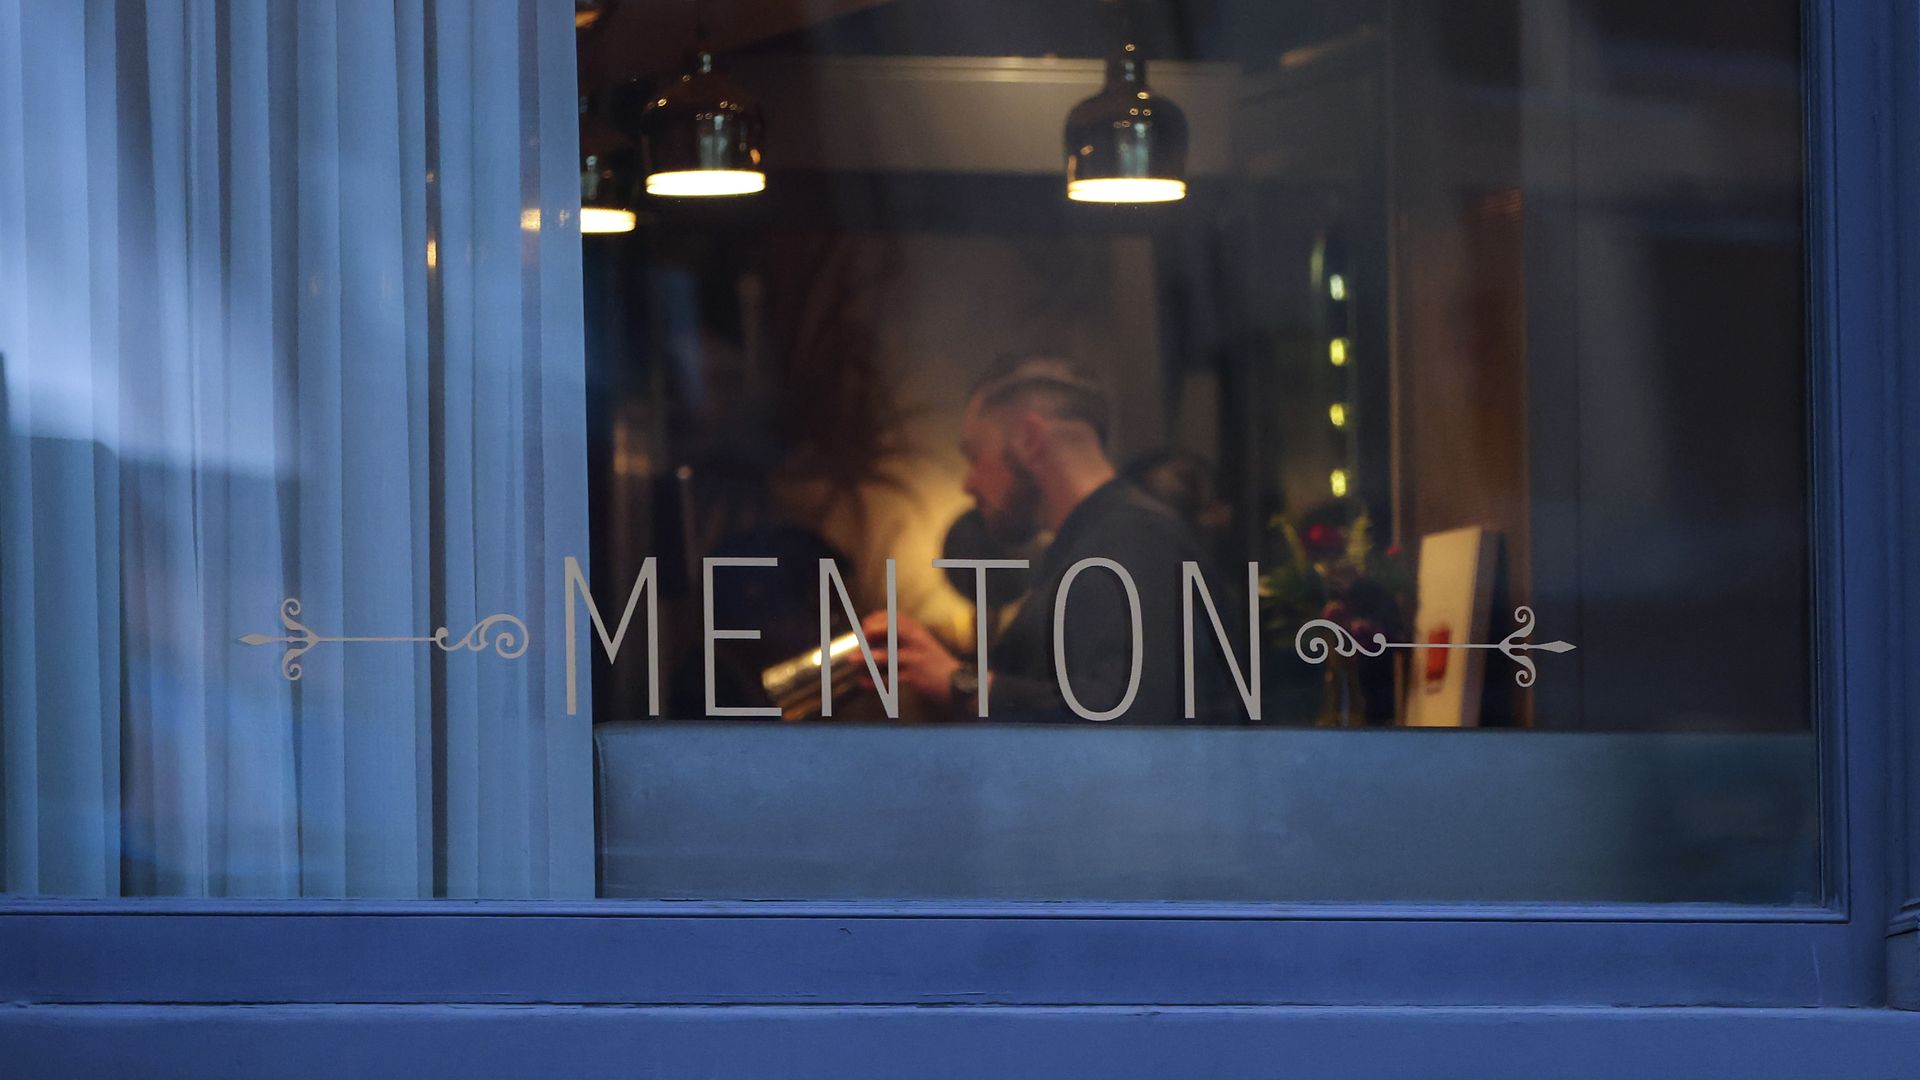 A photo looking into the window of Menton, a Boston restaurant owned by Barbara Lynch, with diners sitting in the background/restaurant.